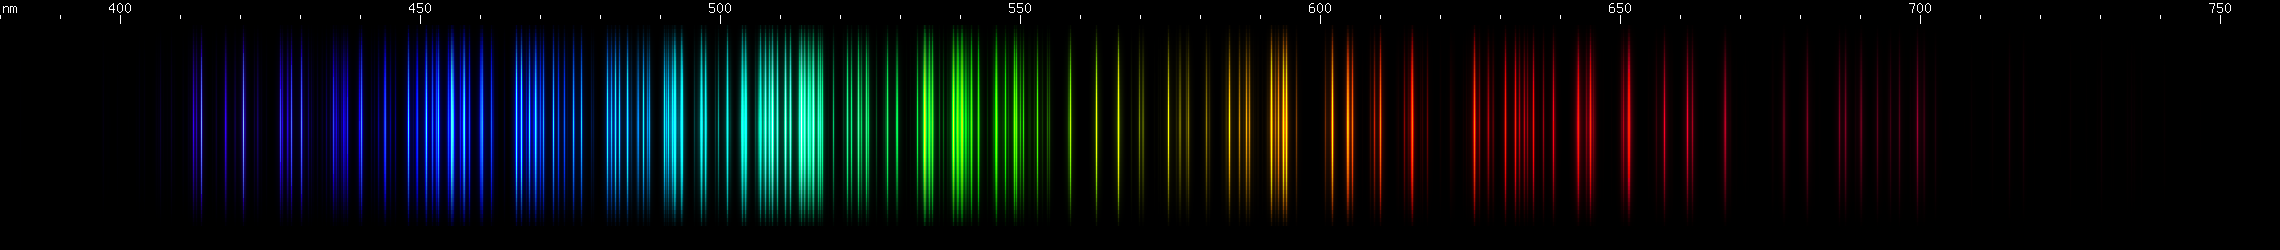 Spectral lines of Tantalum.